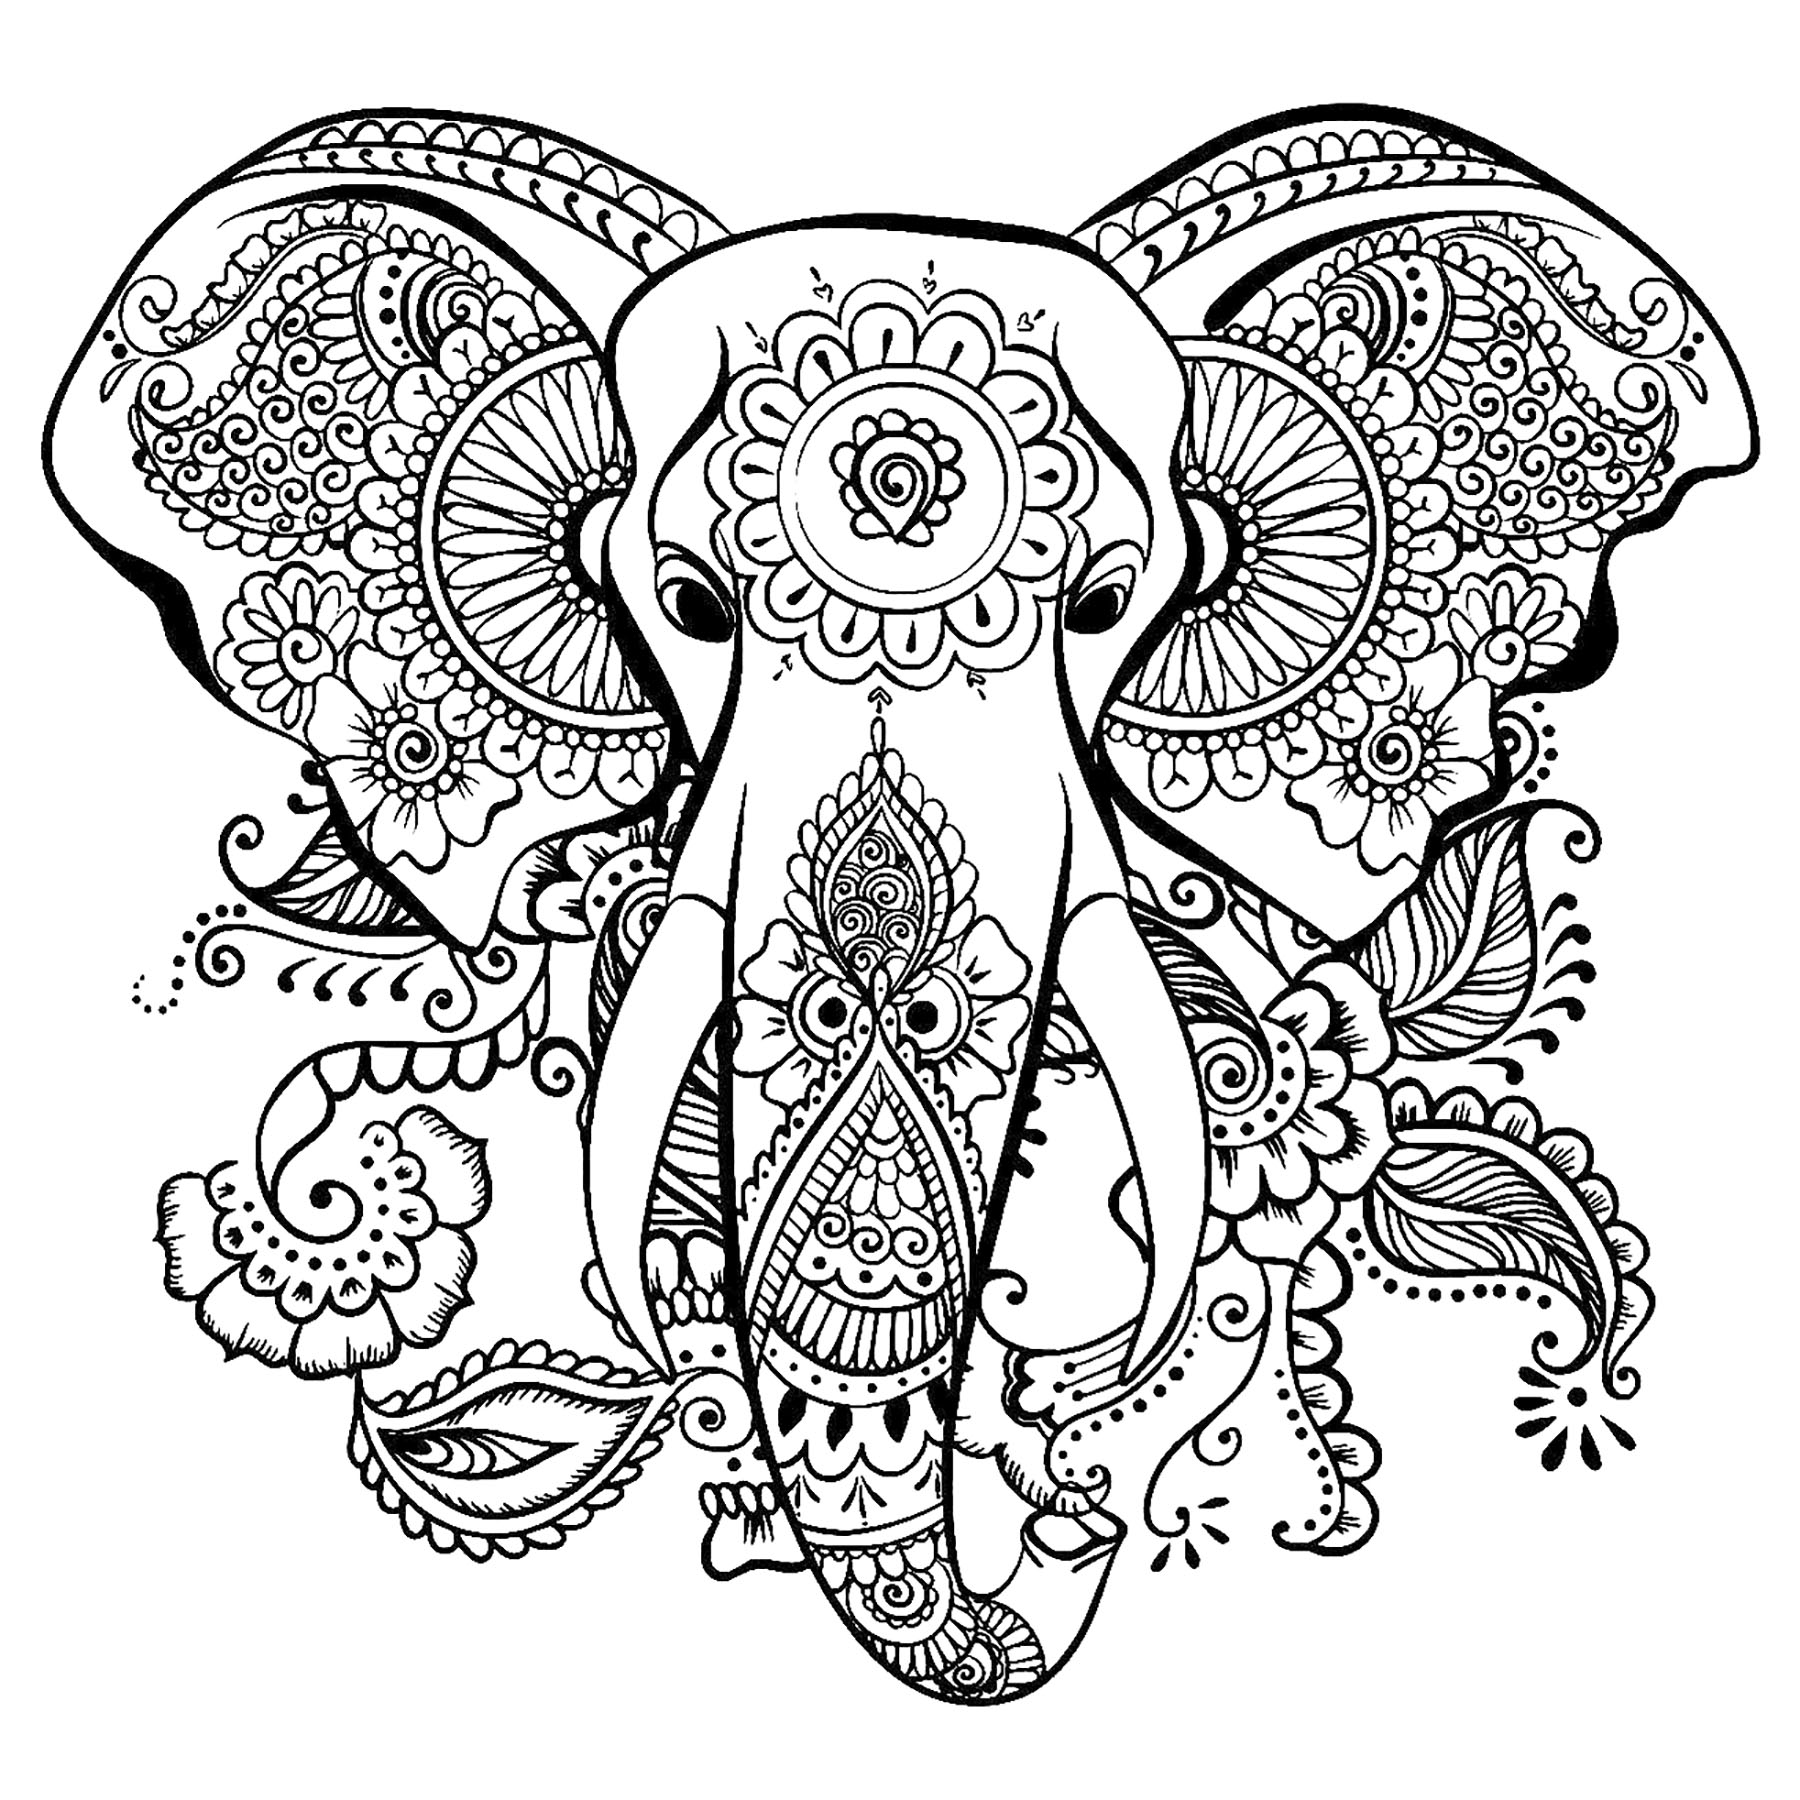 Download Elegant drawing of an elephant - Elephants Adult Coloring ...